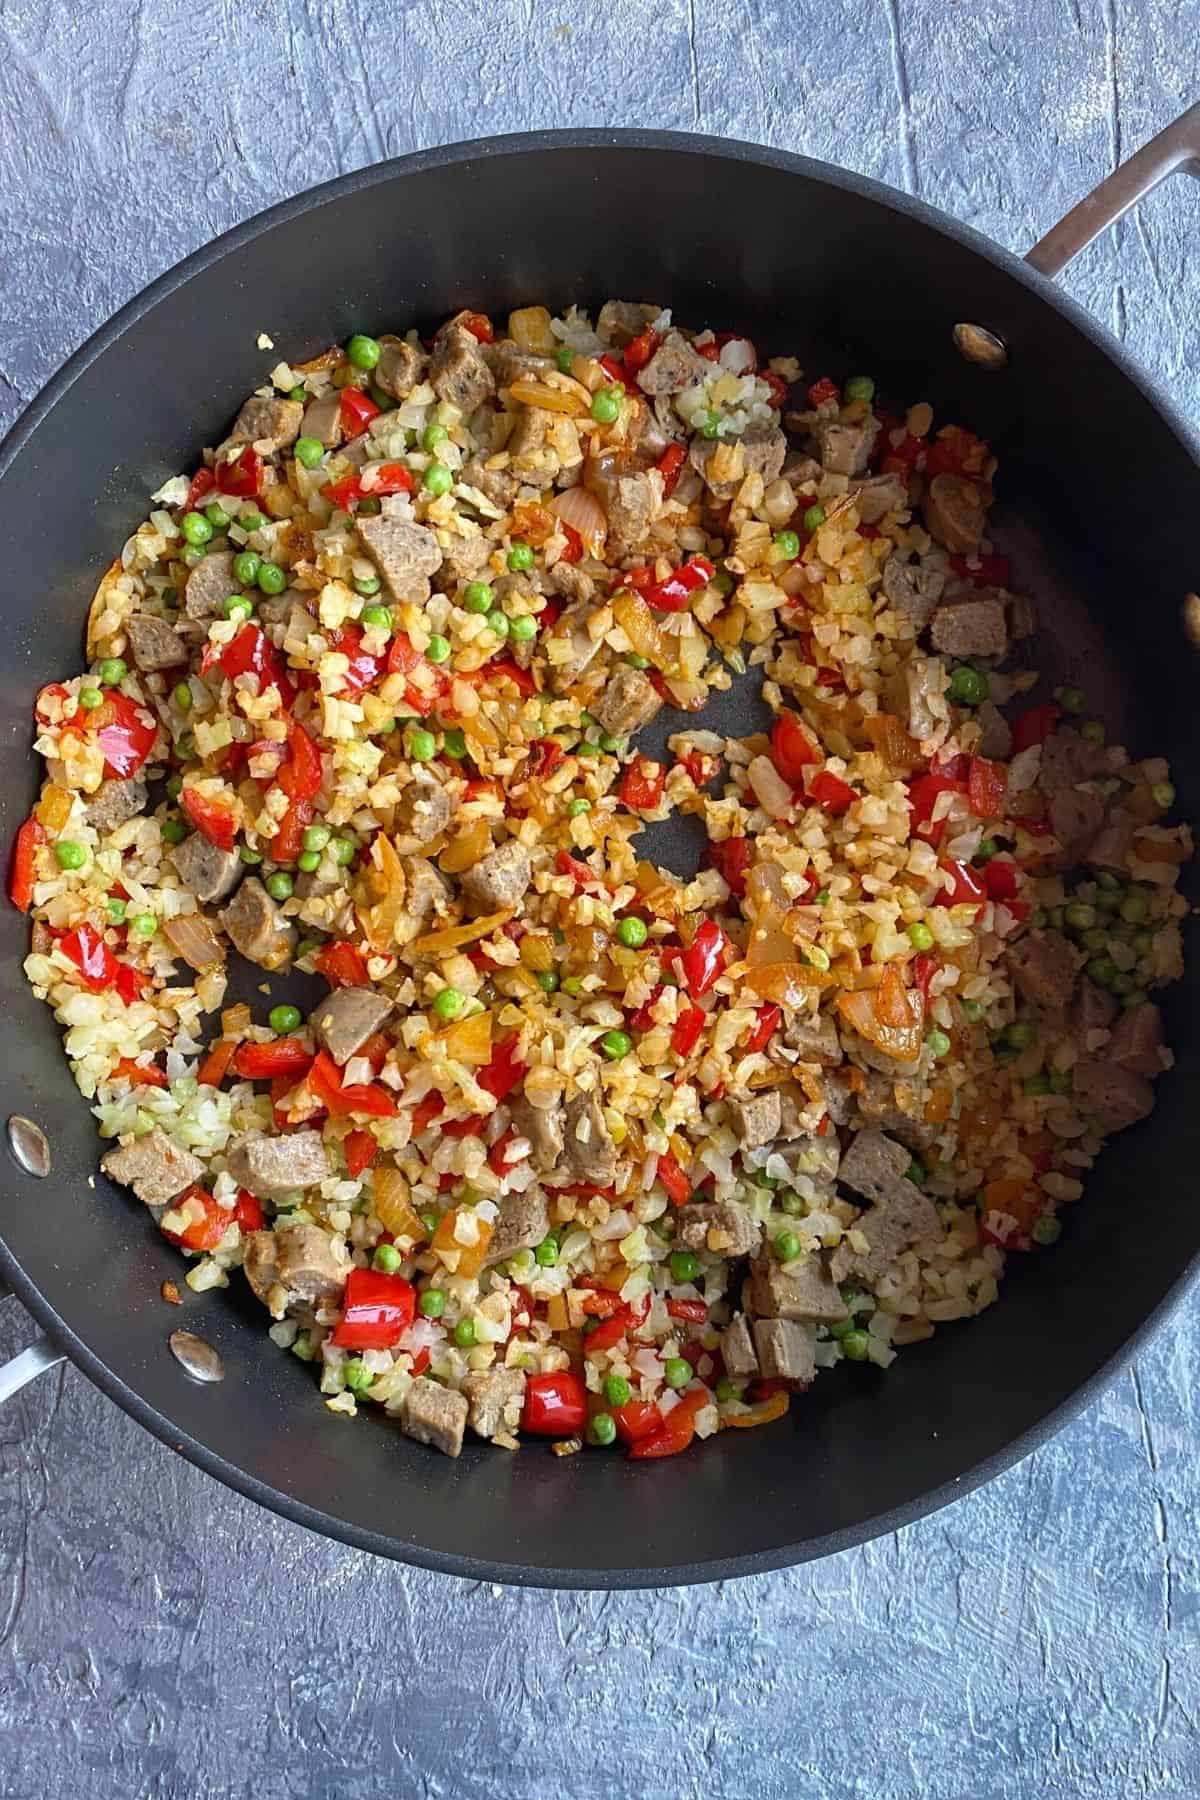 A pan of pans with sauteed cauliflower rice, red peppers, scallions, and onions